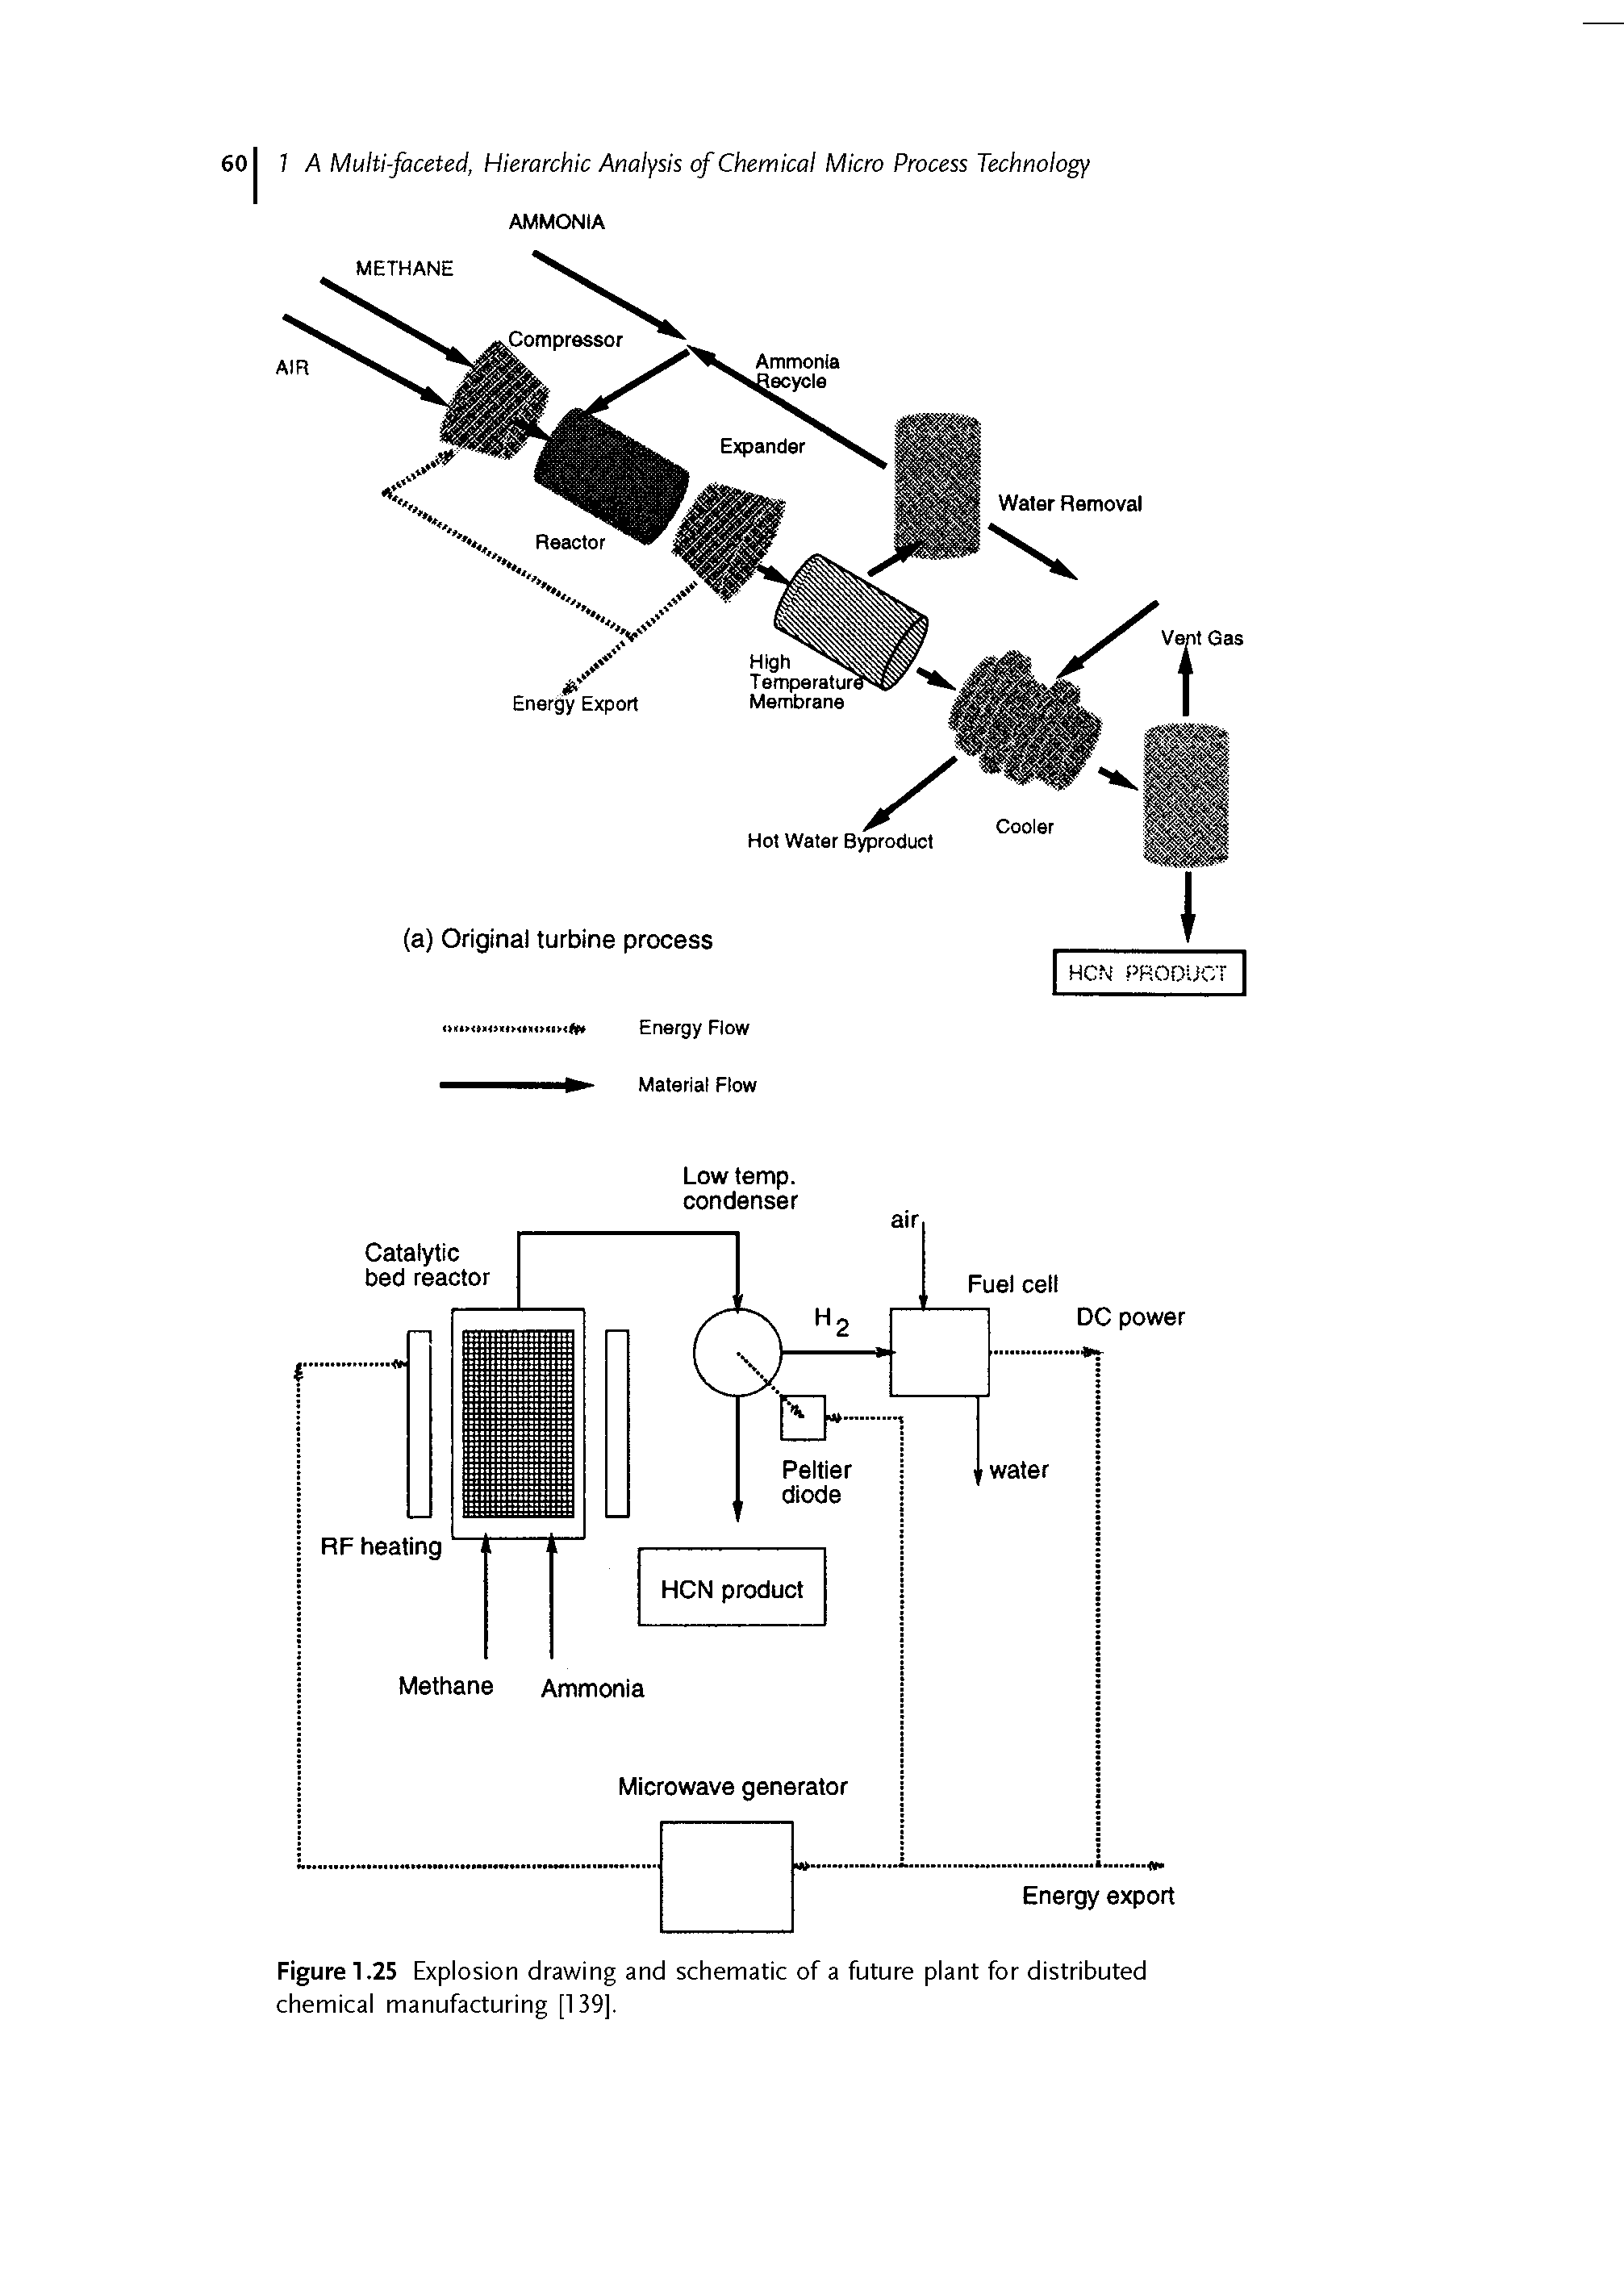 Figure 1.25 Explosion drawing and schematic of a future plant for distributed chemical manufacturing [139].